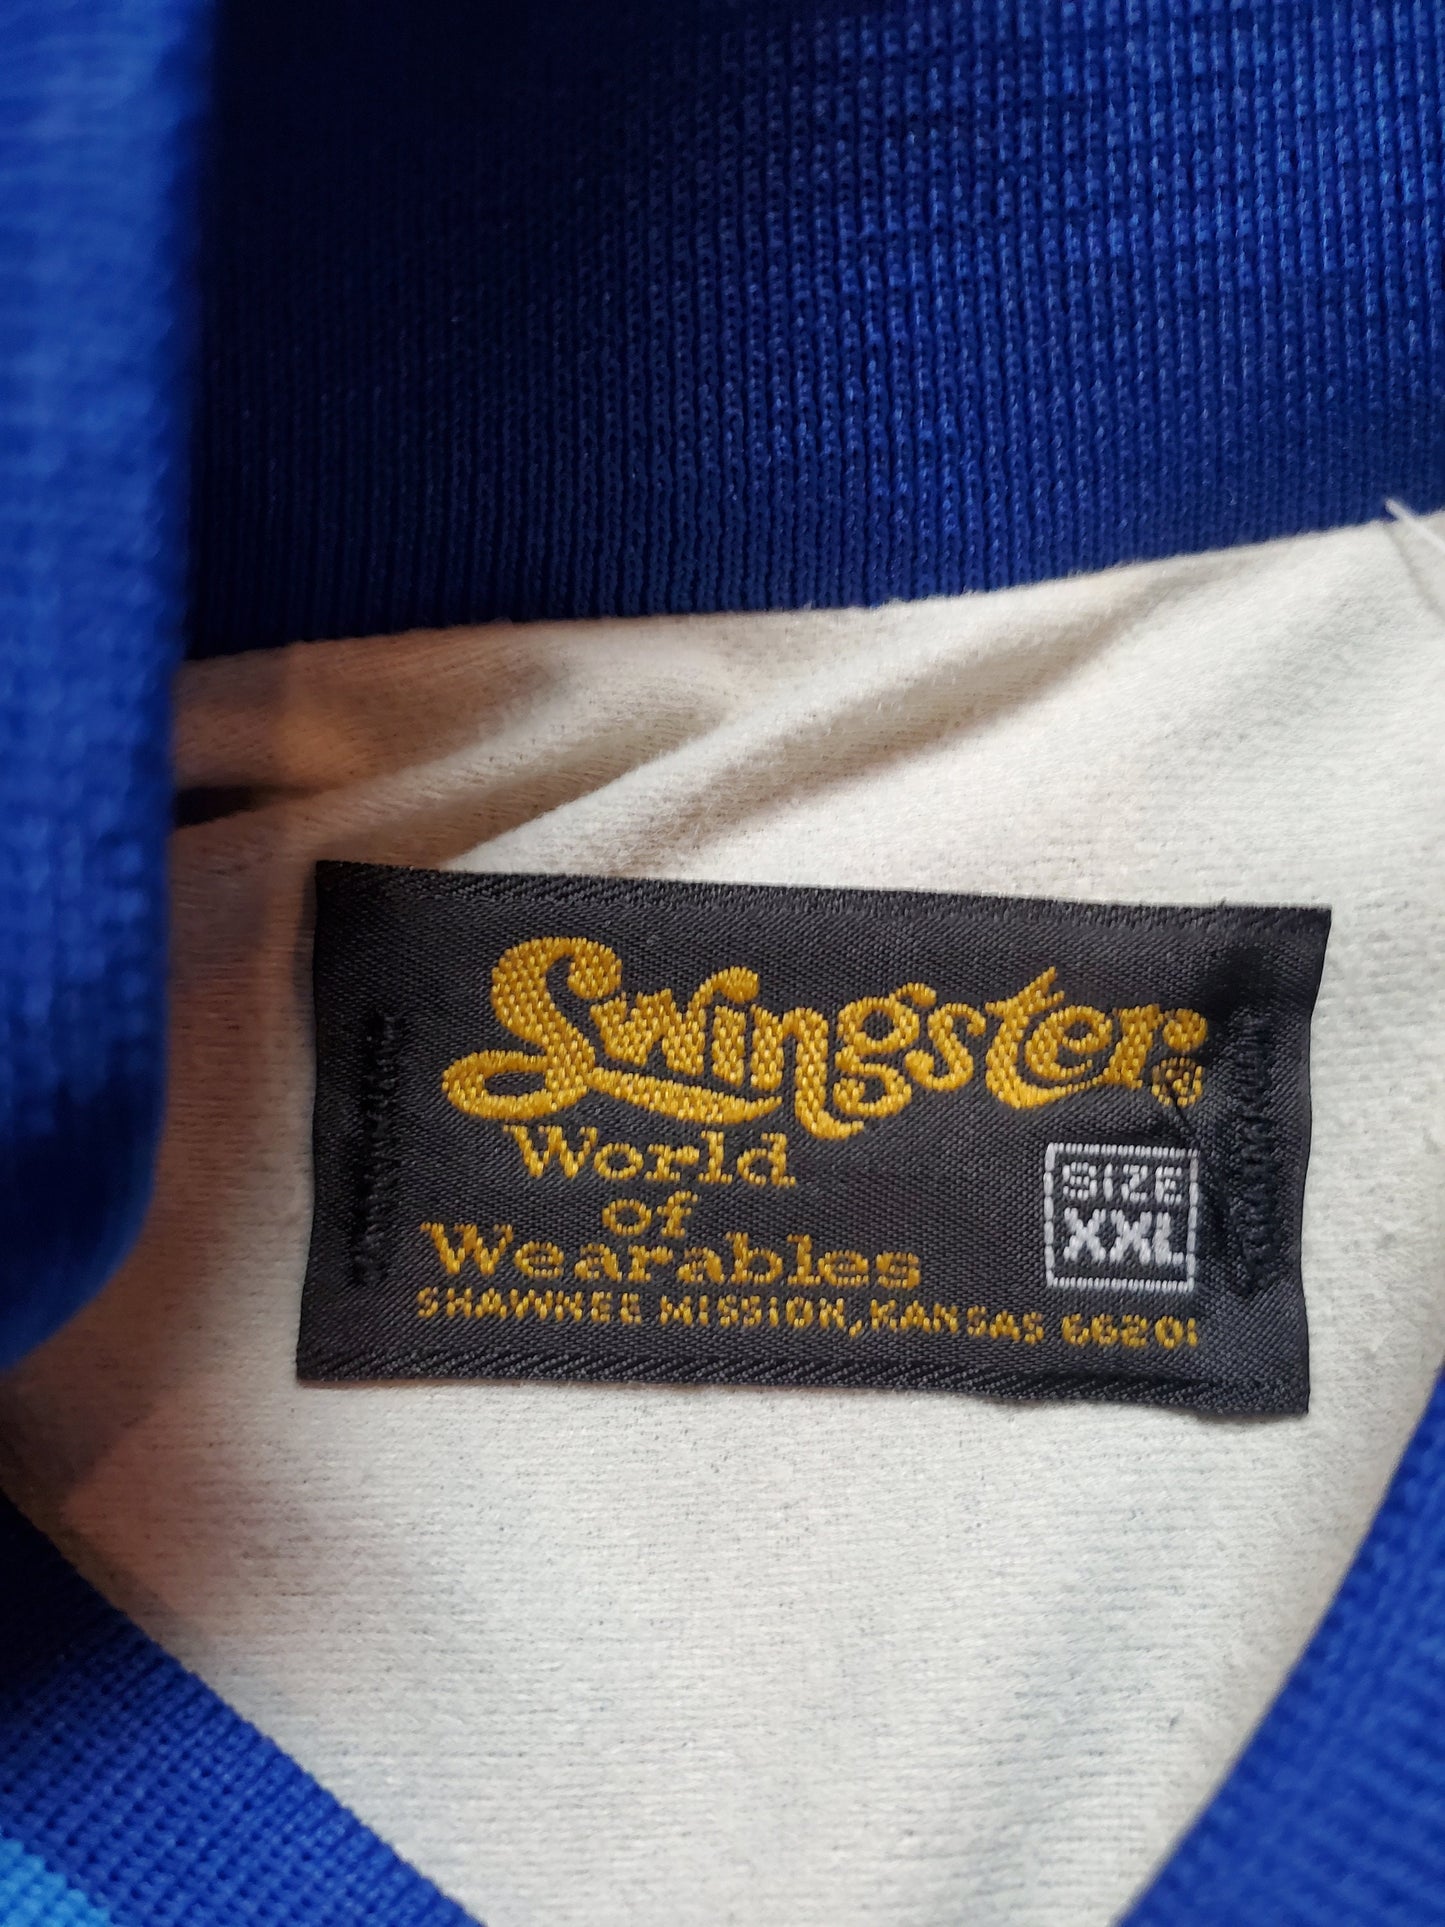 1970s/1980s Swingster BF Goodrich Satin Bomber Jacket Made in USA Size xl/xxl